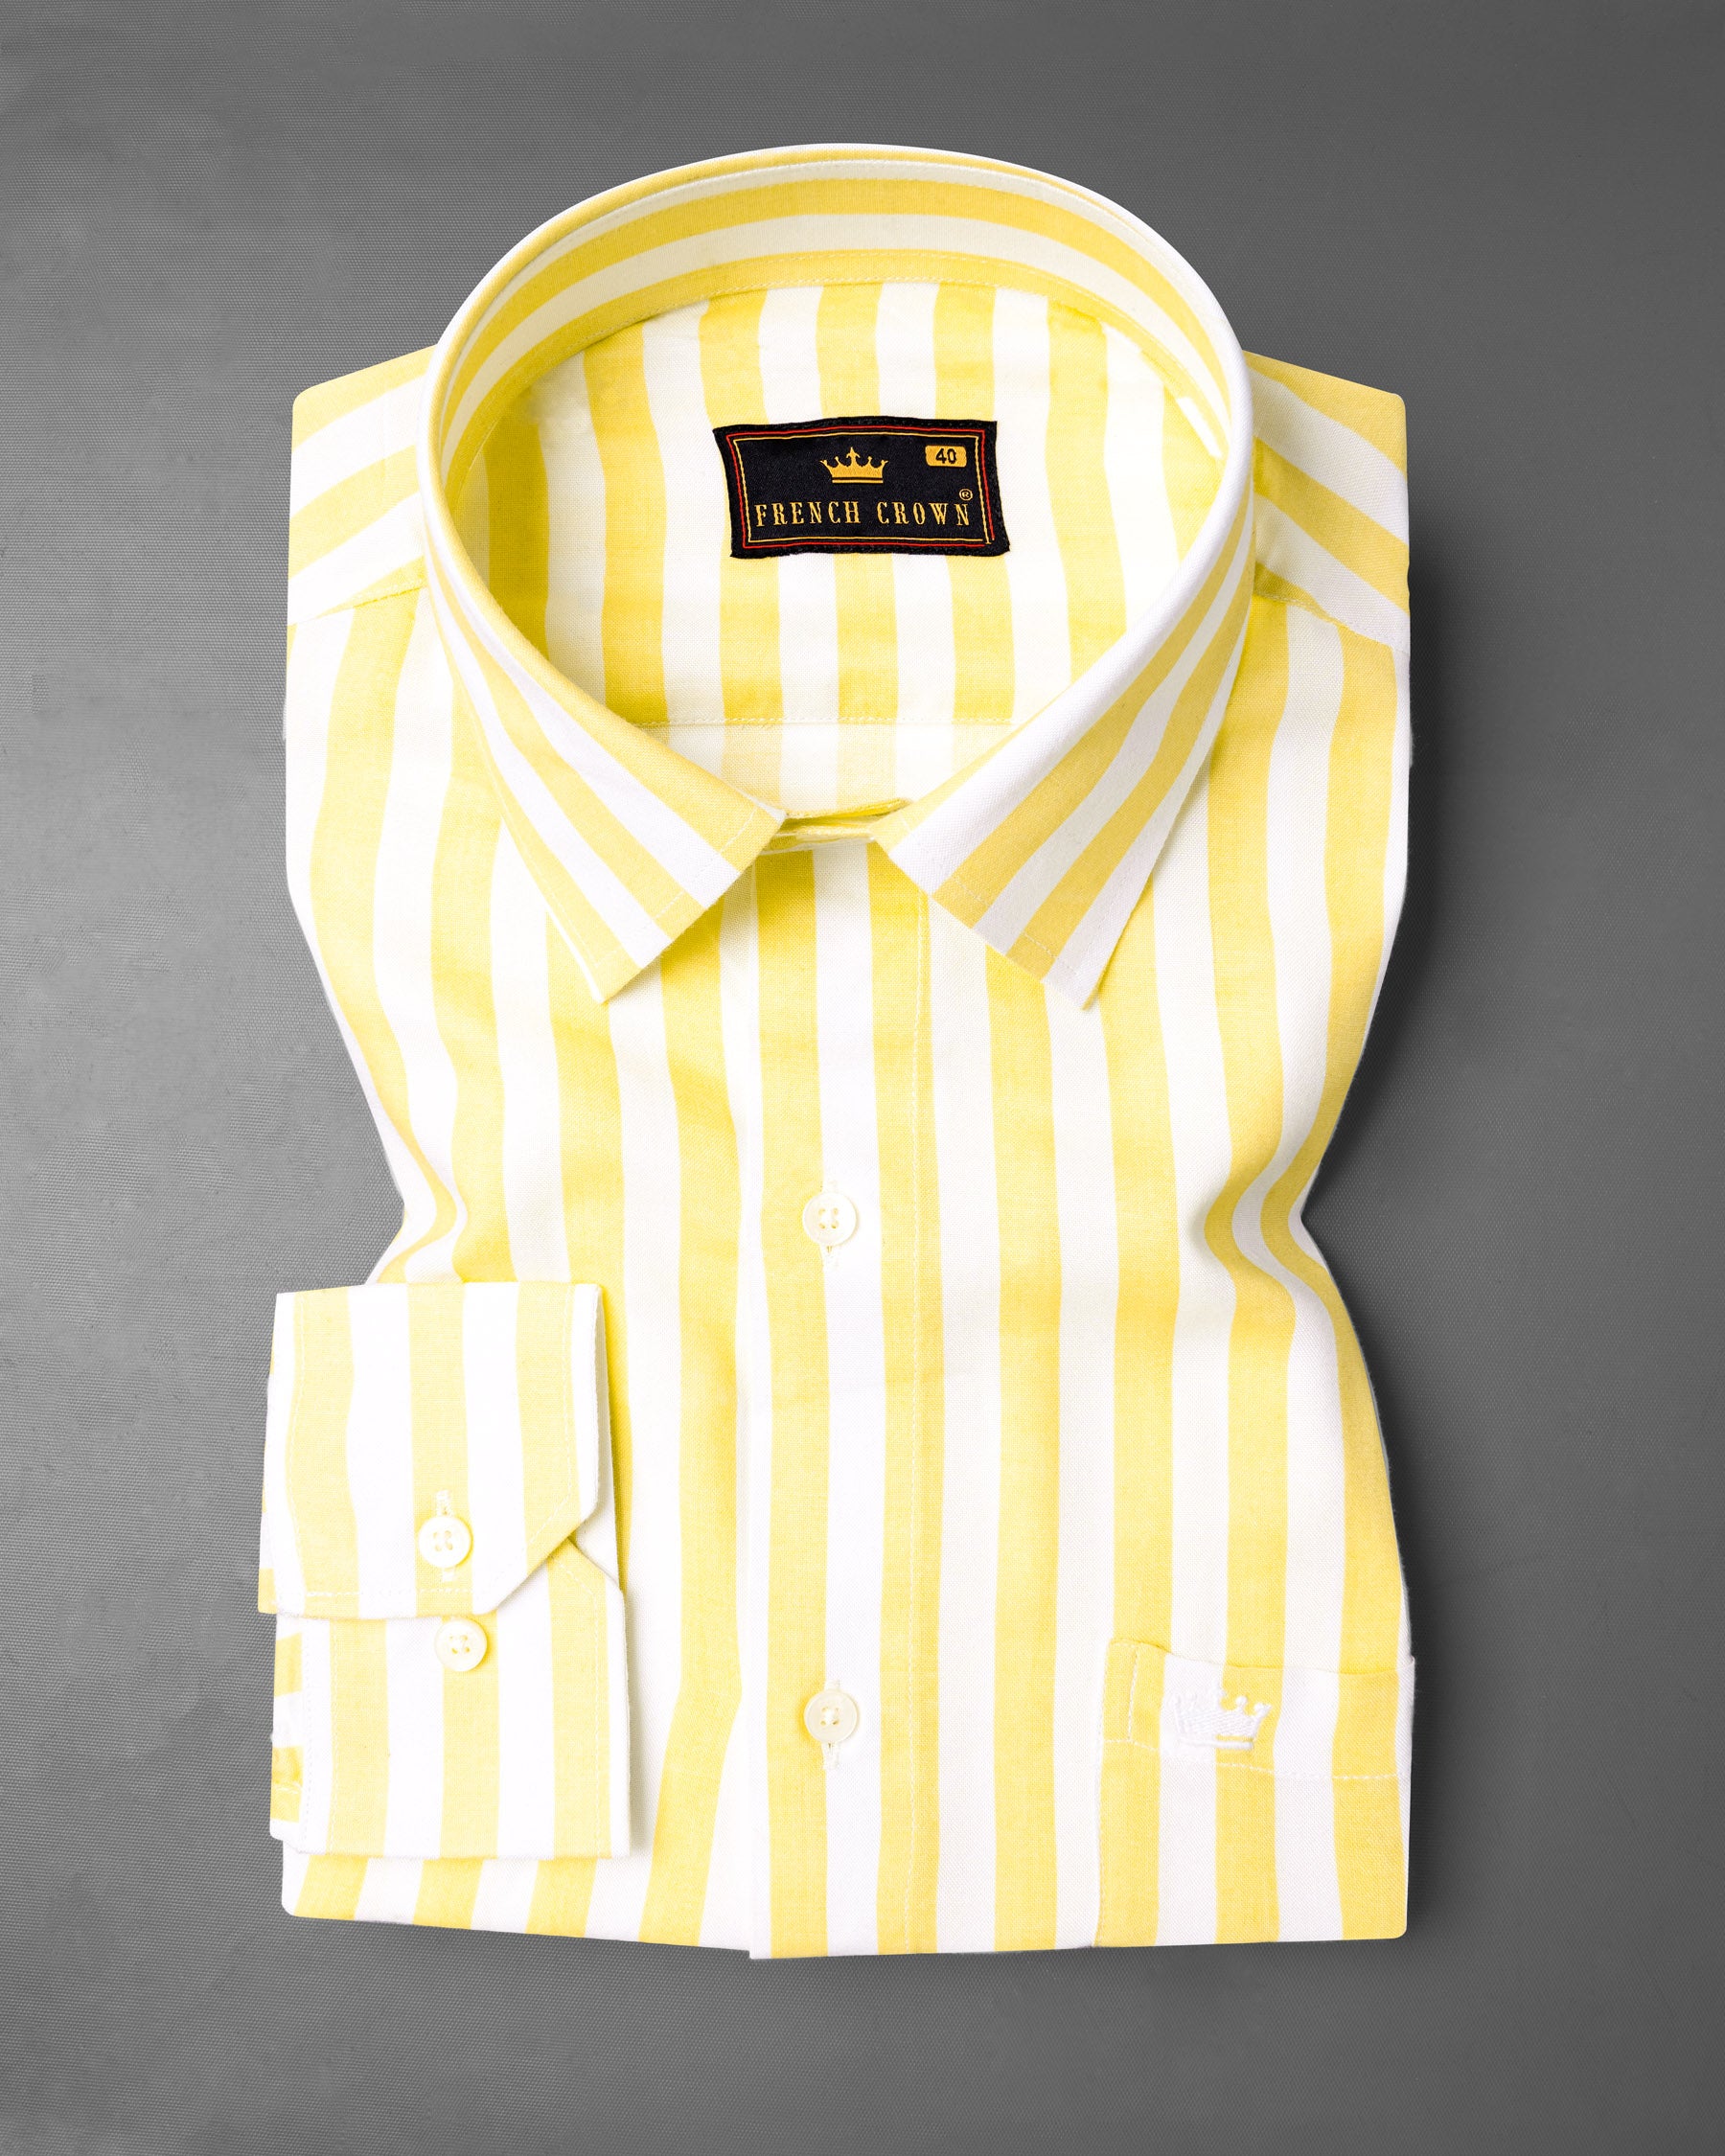 Colonial Yellow and Bright White Striped Premium Tencel Shirt 6774-38,6774-38,6774-39,6774-39,6774-40,6774-40,6774-42,6774-42,6774-44,6774-44,6774-46,6774-46,6774-48,6774-48,6774-50,6774-50,6774-52,6774-52